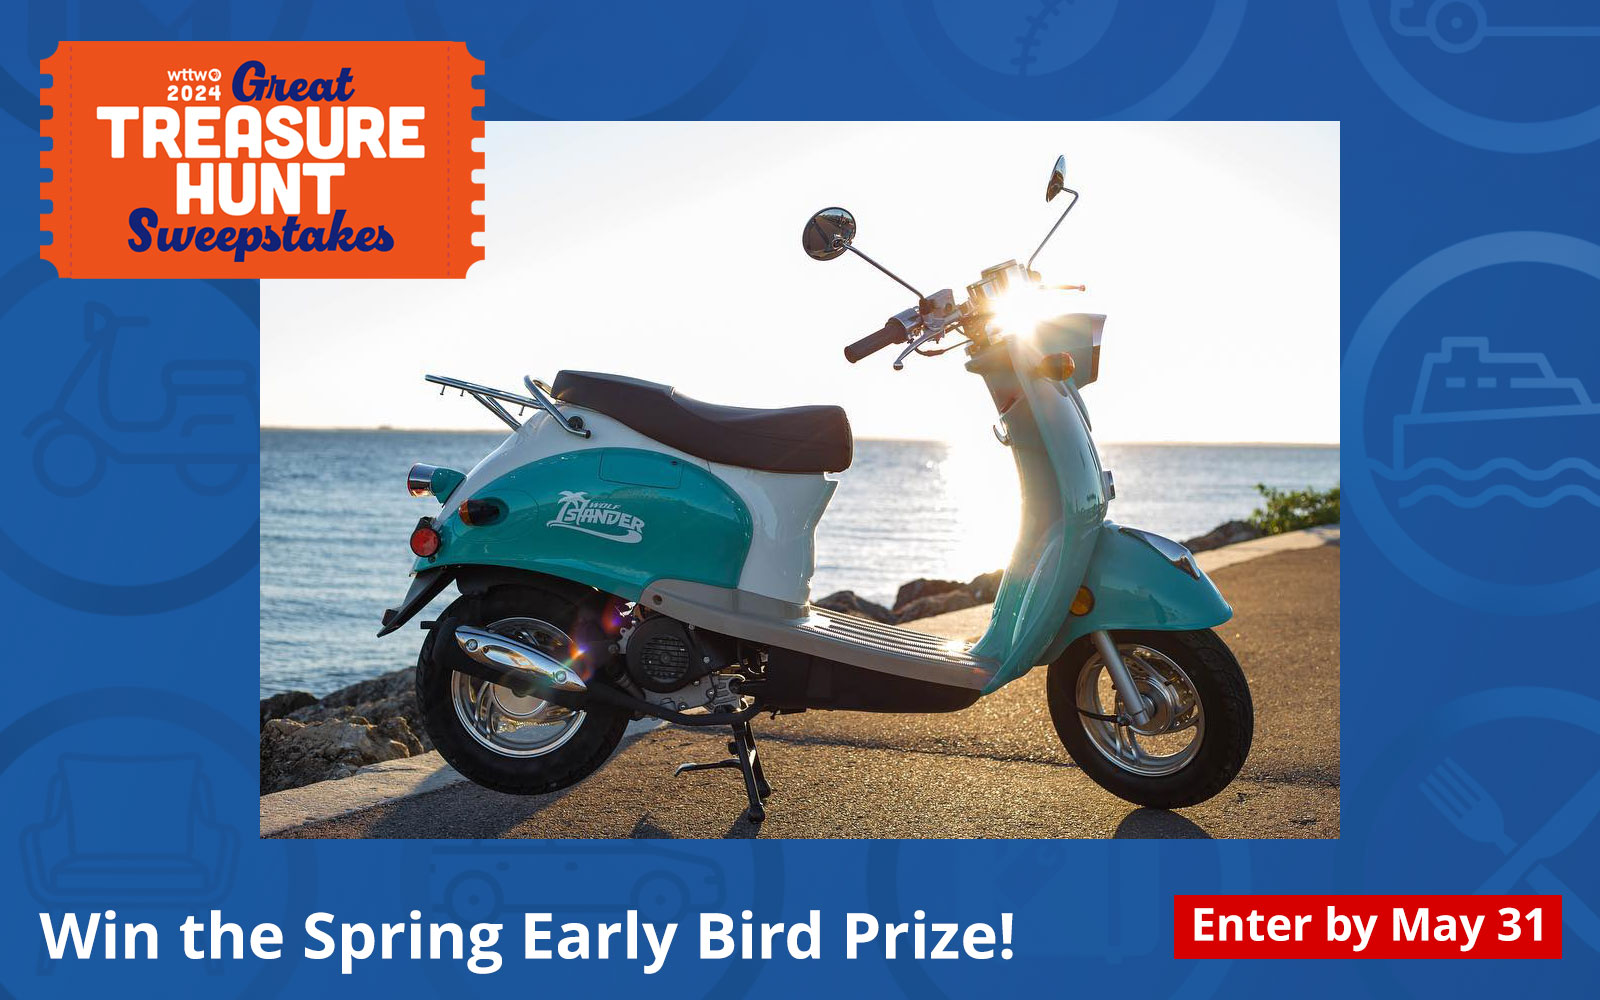 Enter before May 31st to win the Spring Early Bird Prize